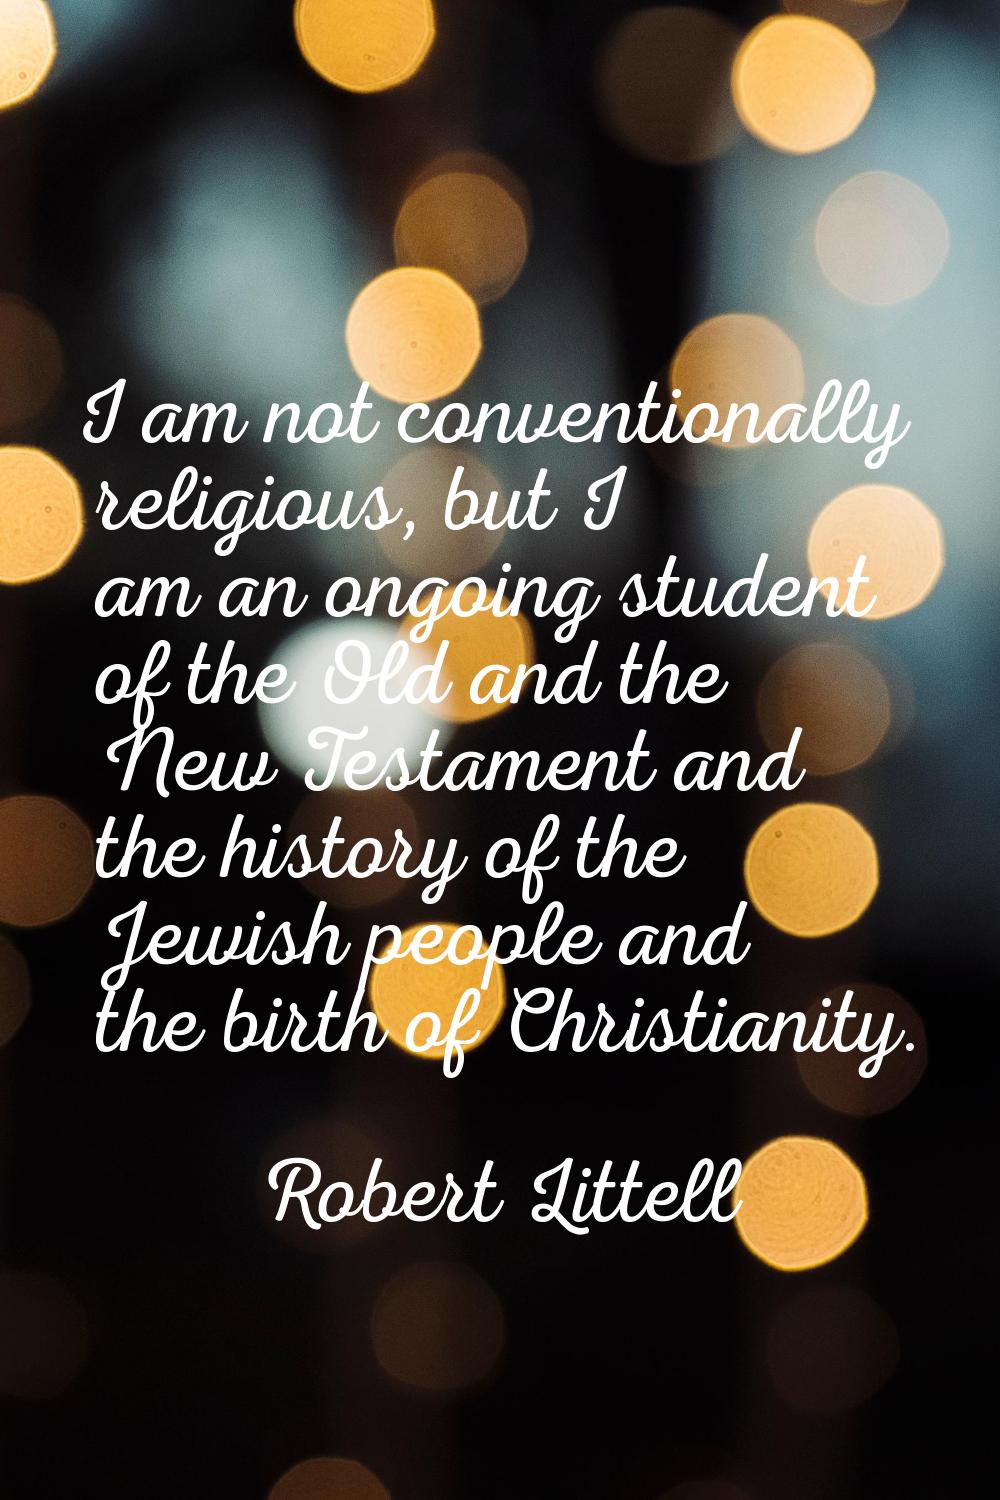 I am not conventionally religious, but I am an ongoing student of the Old and the New Testament and